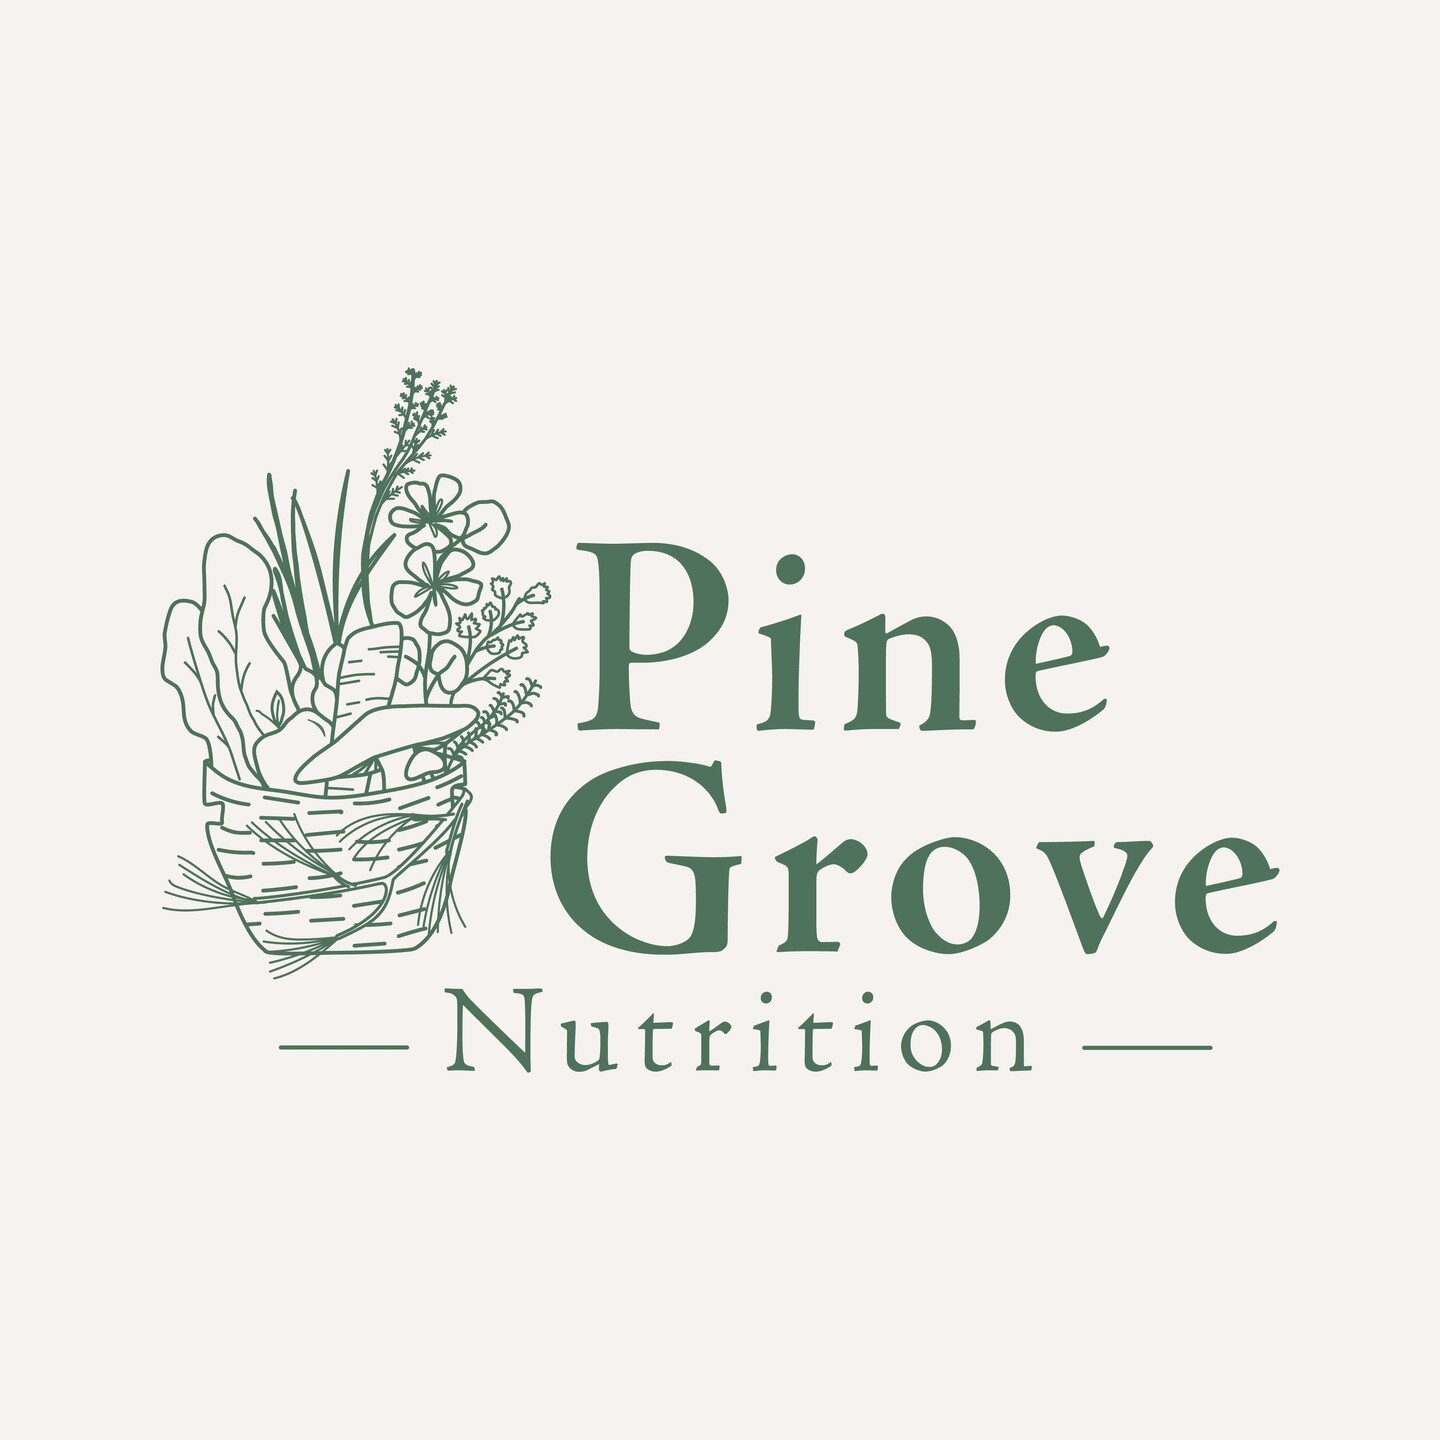 NEW LOGO ALERT!! 

Design credit goes to Kelsey at @black.rabbit.design.studio. She truly took all of my jumbled ideas and wove them into the logo of my dreams. 

I hope y'all like it as much as I do!